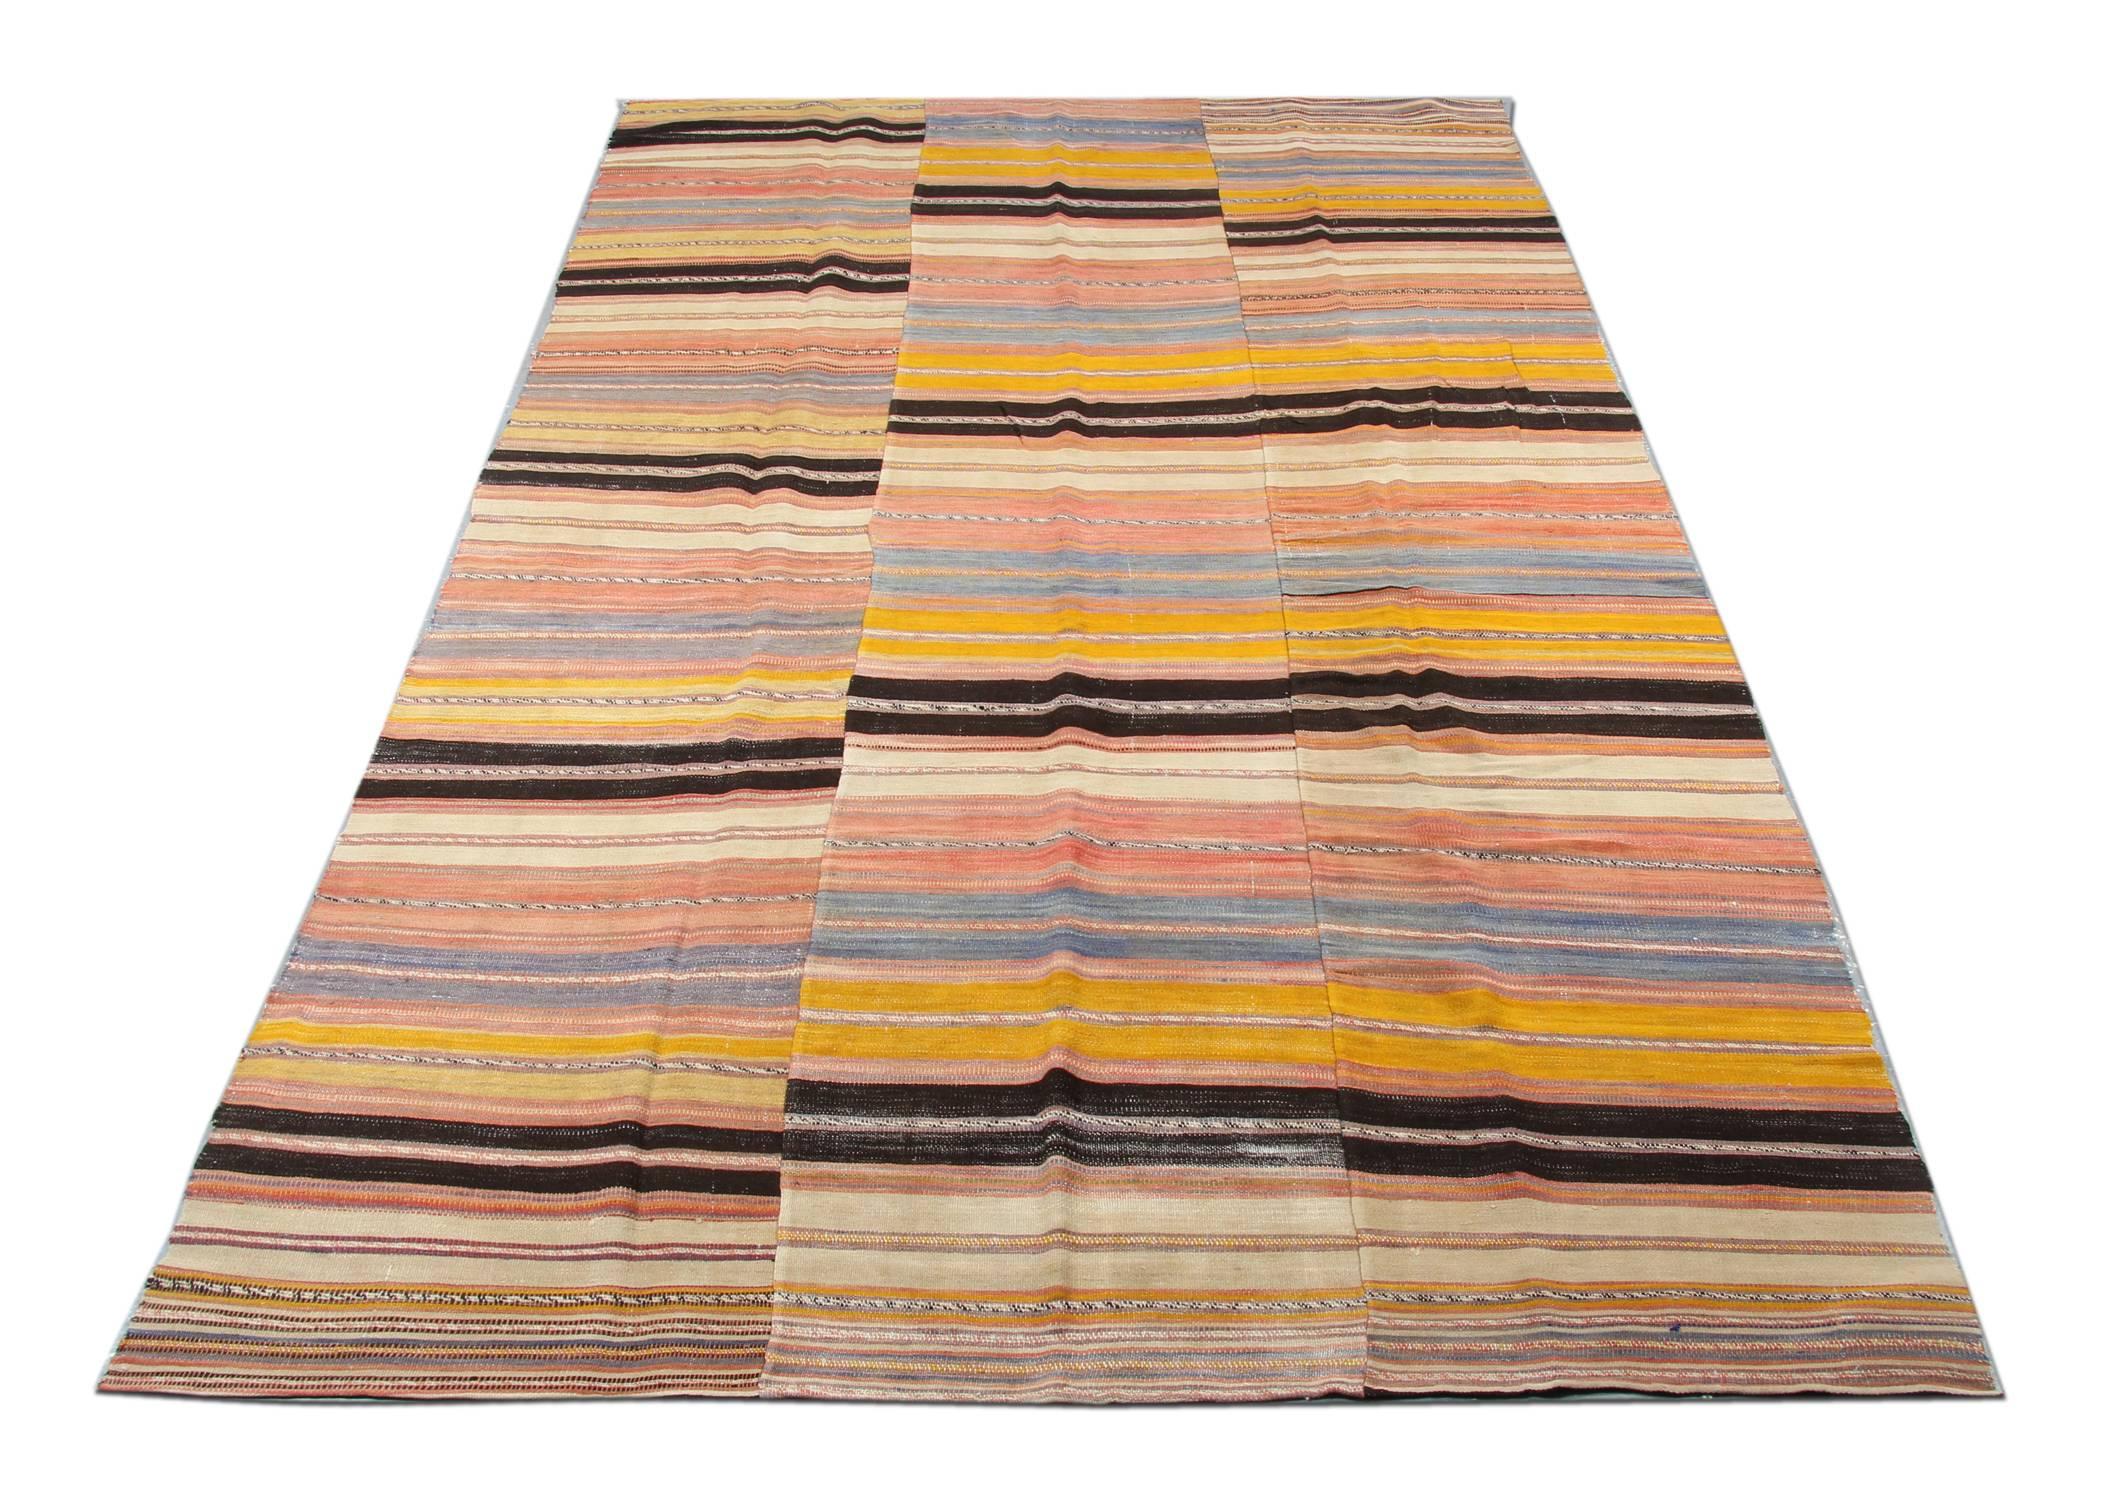 This geometric rug is a practical variation on the flat-weave Kilim, this Persian coverlet, or Jajim, features a bold, inherently versatile pattern of multi-width stripes perfectly on the woven rug suited for Mid-Century modern interiors. Ochre and